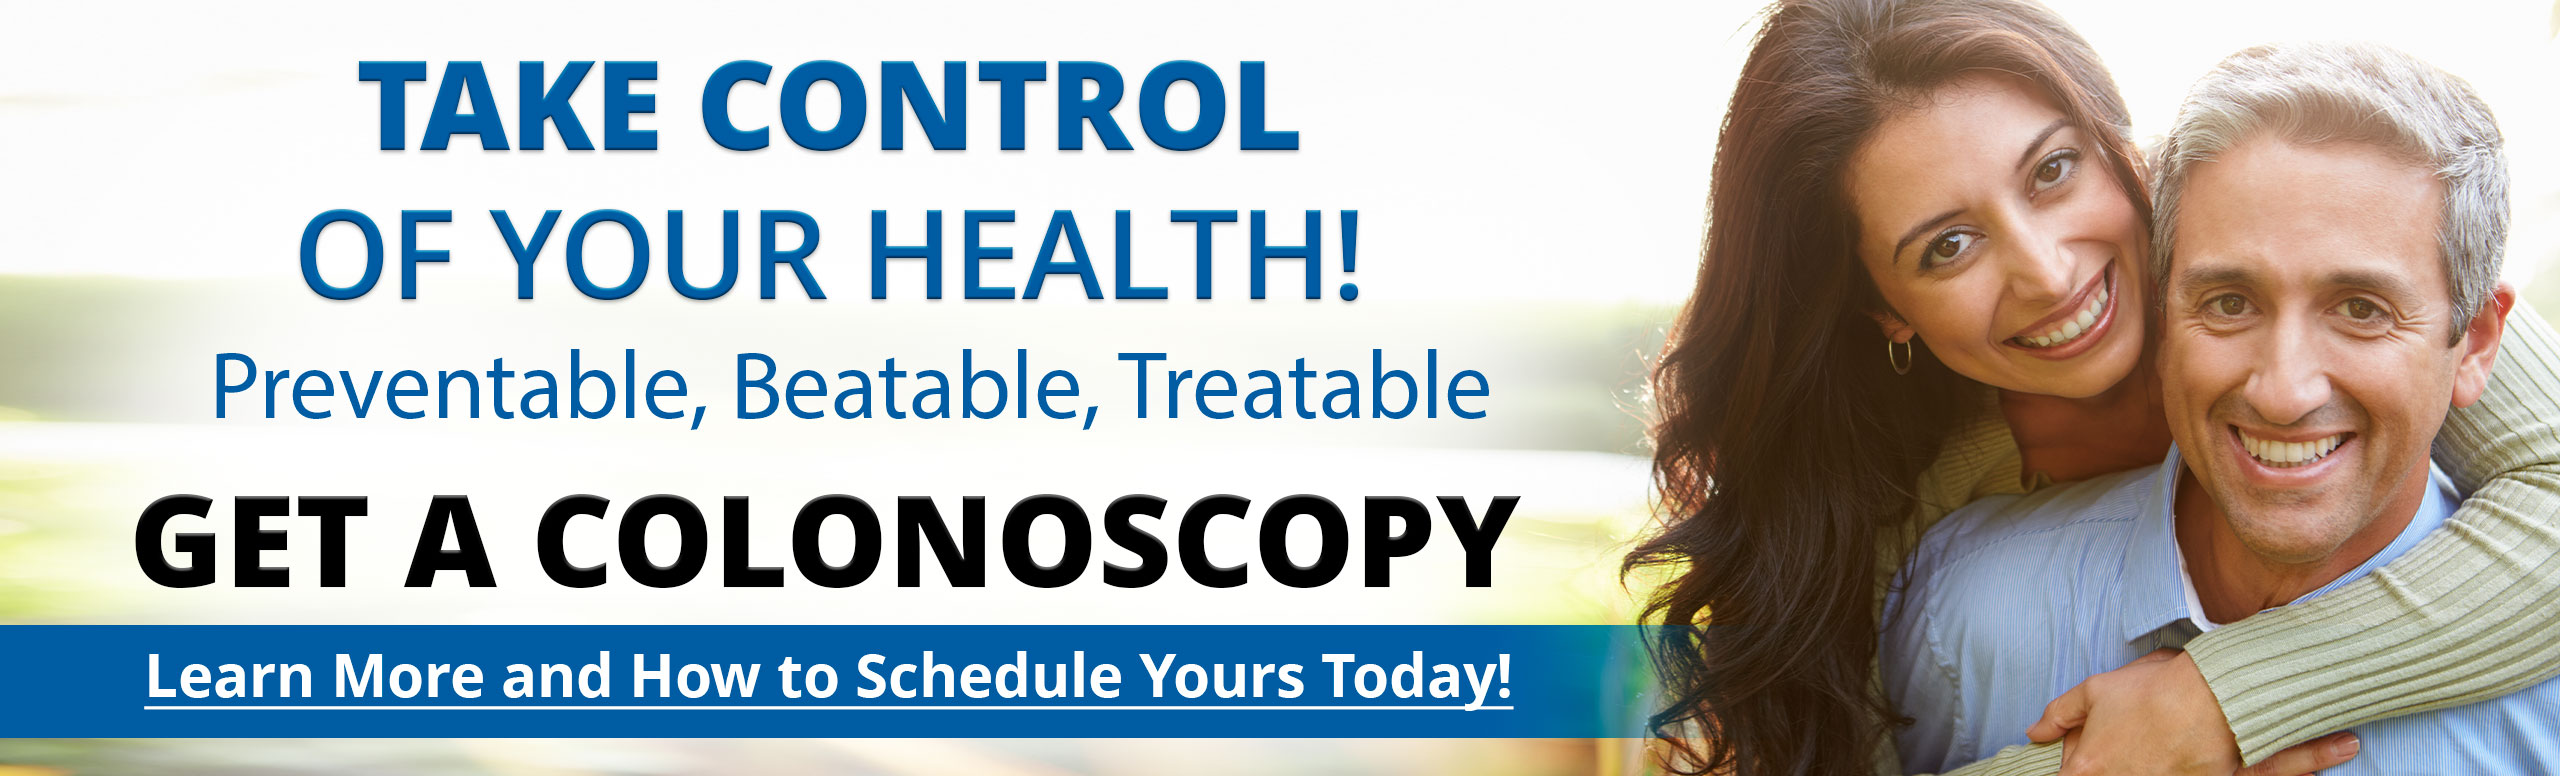 Take Control of your Health!

Preventable, Beatable, Treatable!

Get a Colonoscopy

Learn more and how to schedule yours today!